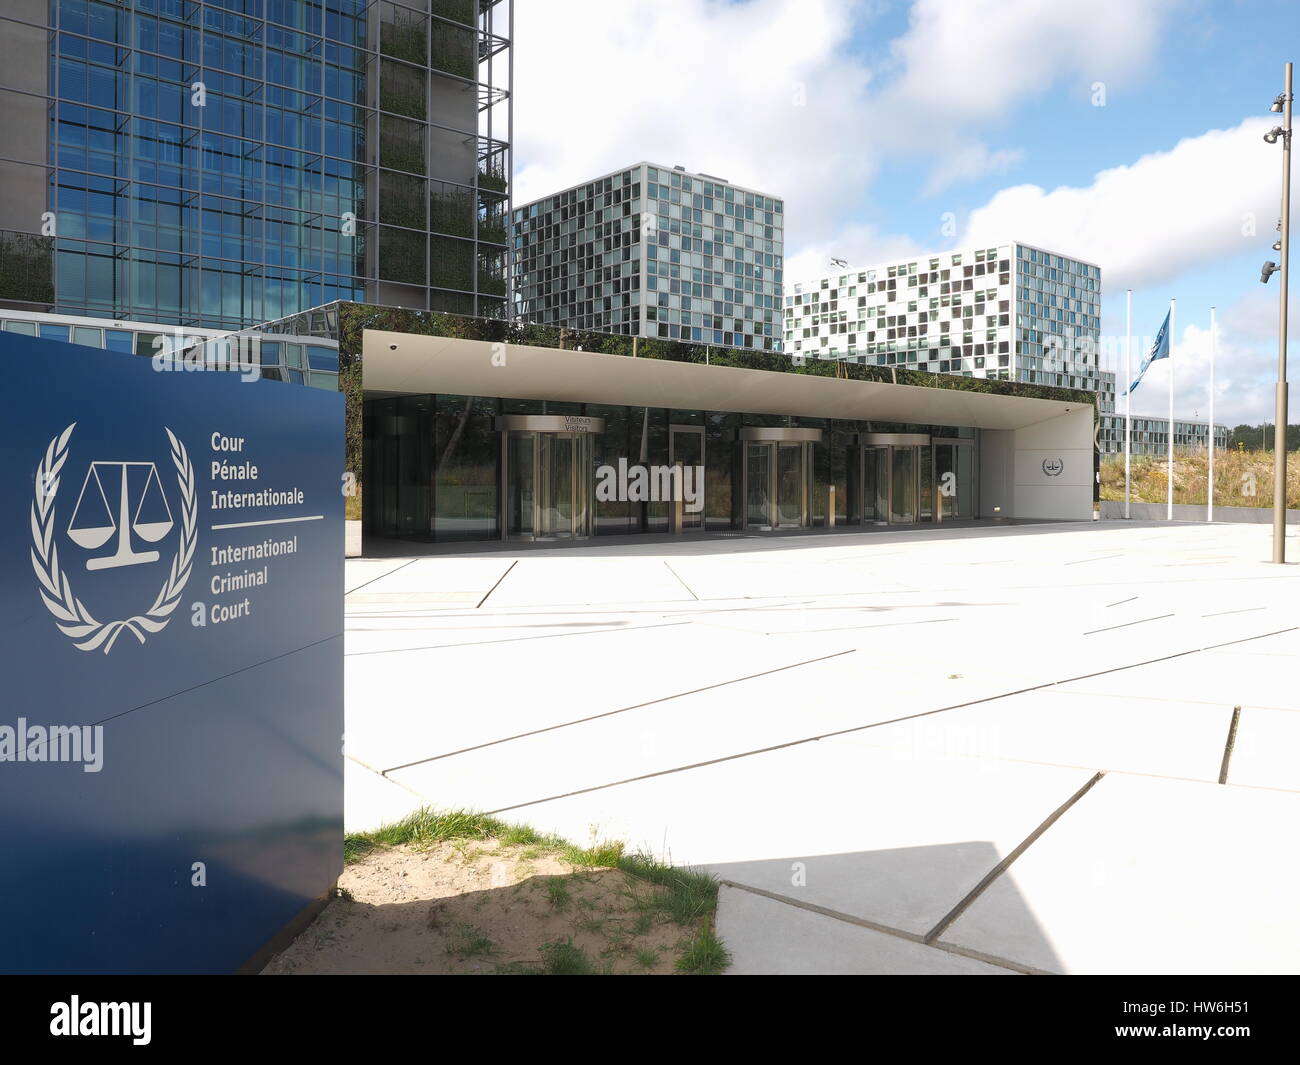 The Hague, Netherlands - July 5, 2016: The International Criminal Court forecourt, entrance and sign at the new 2016 opened ICC building. Stock Photo